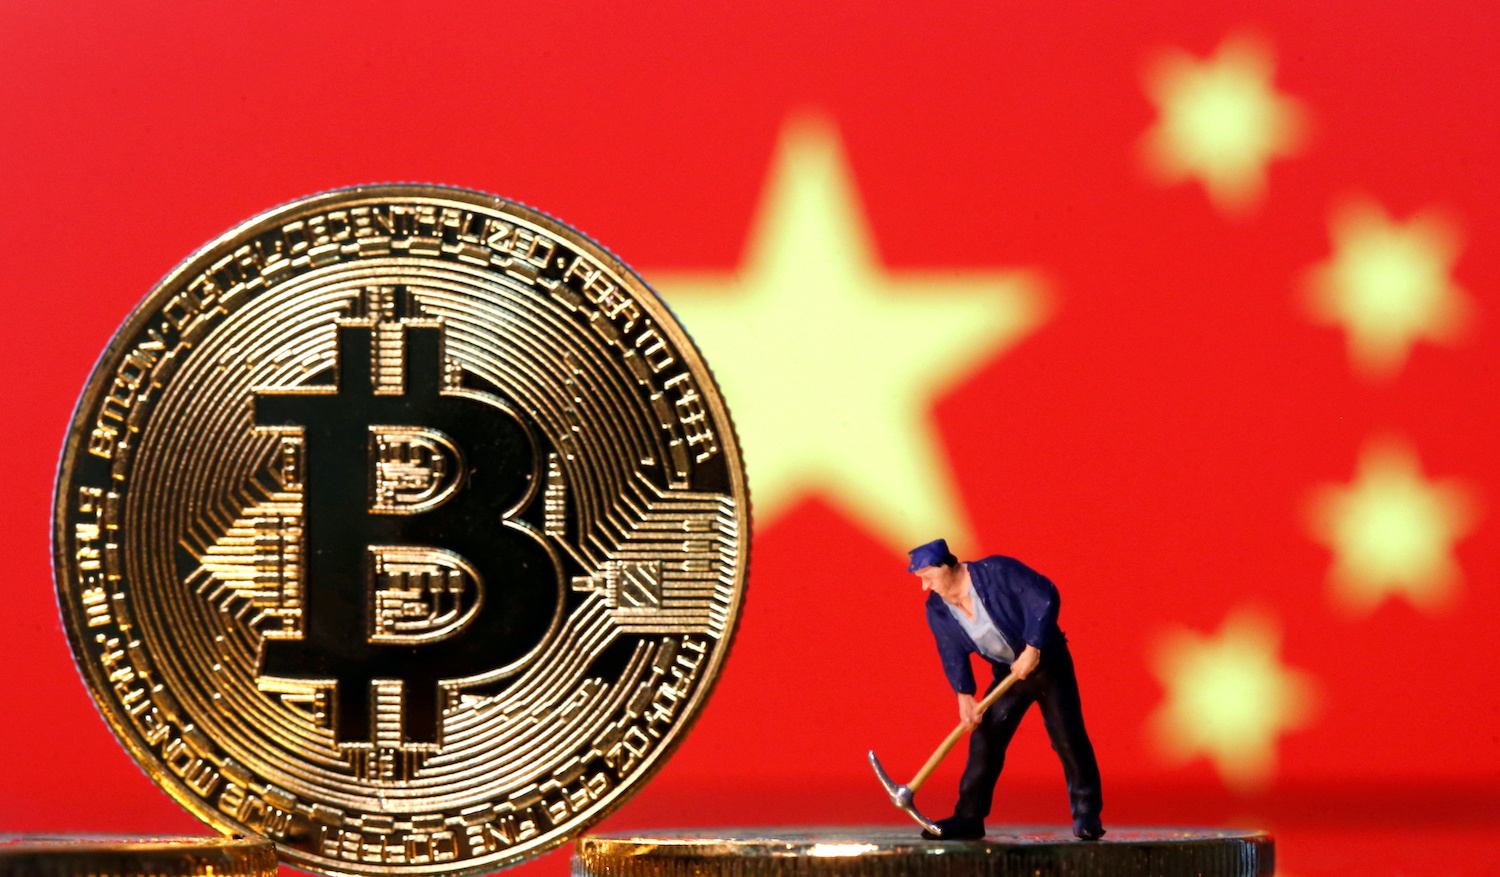 Bitcoin battered by China crackdown, Musk’s tweets and hackers’ warning